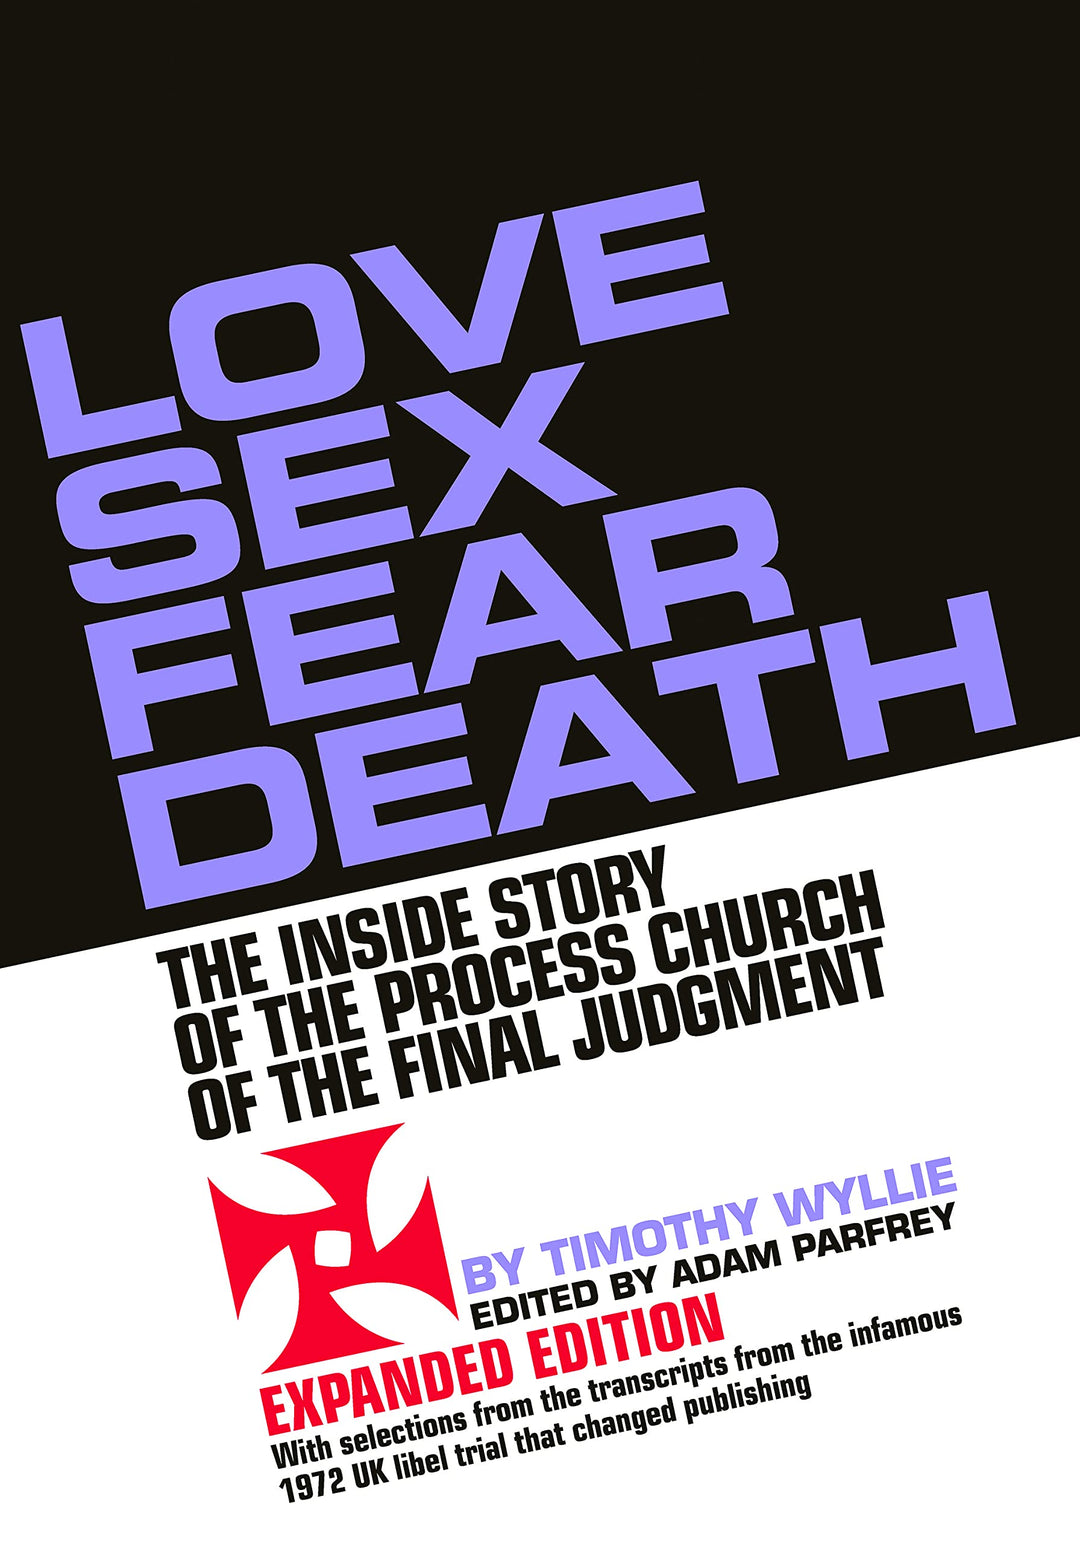 Love Sex Fear Death: The Inside Story of the Process Church of the Final Judgment -- Expanded Edition by Timothy Wyllie